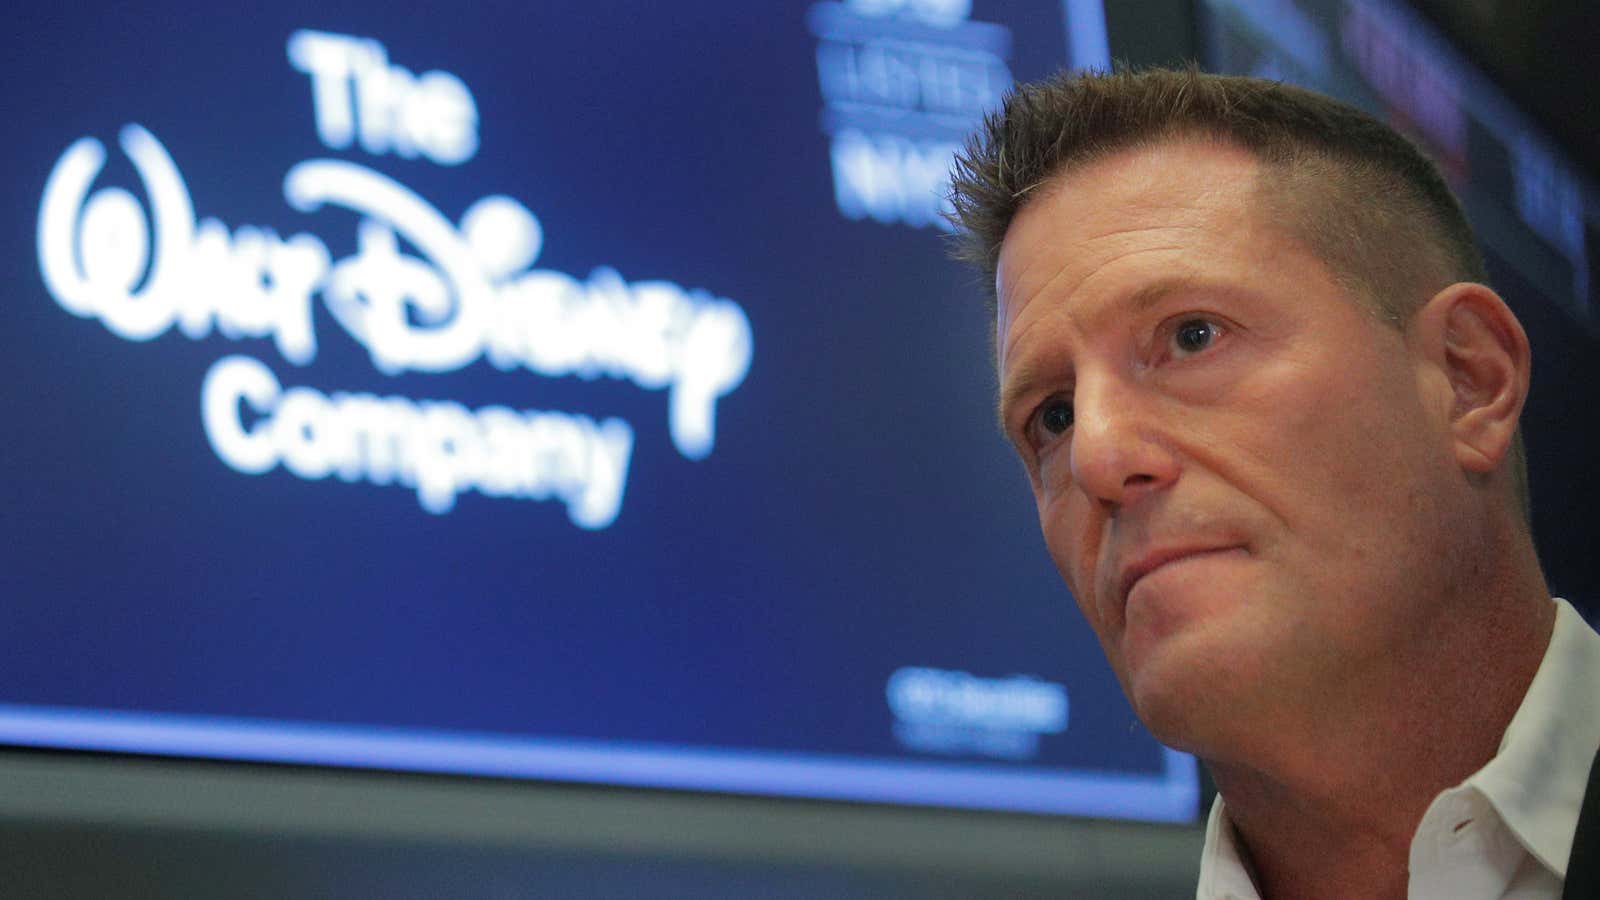 Kevin Mayer, Disney’s head of direct-to-consumer division, on the floor at the New York Stock Exchange (NYSE) in New York, U.S., October 22, 2019. REUTERS/Brendan…